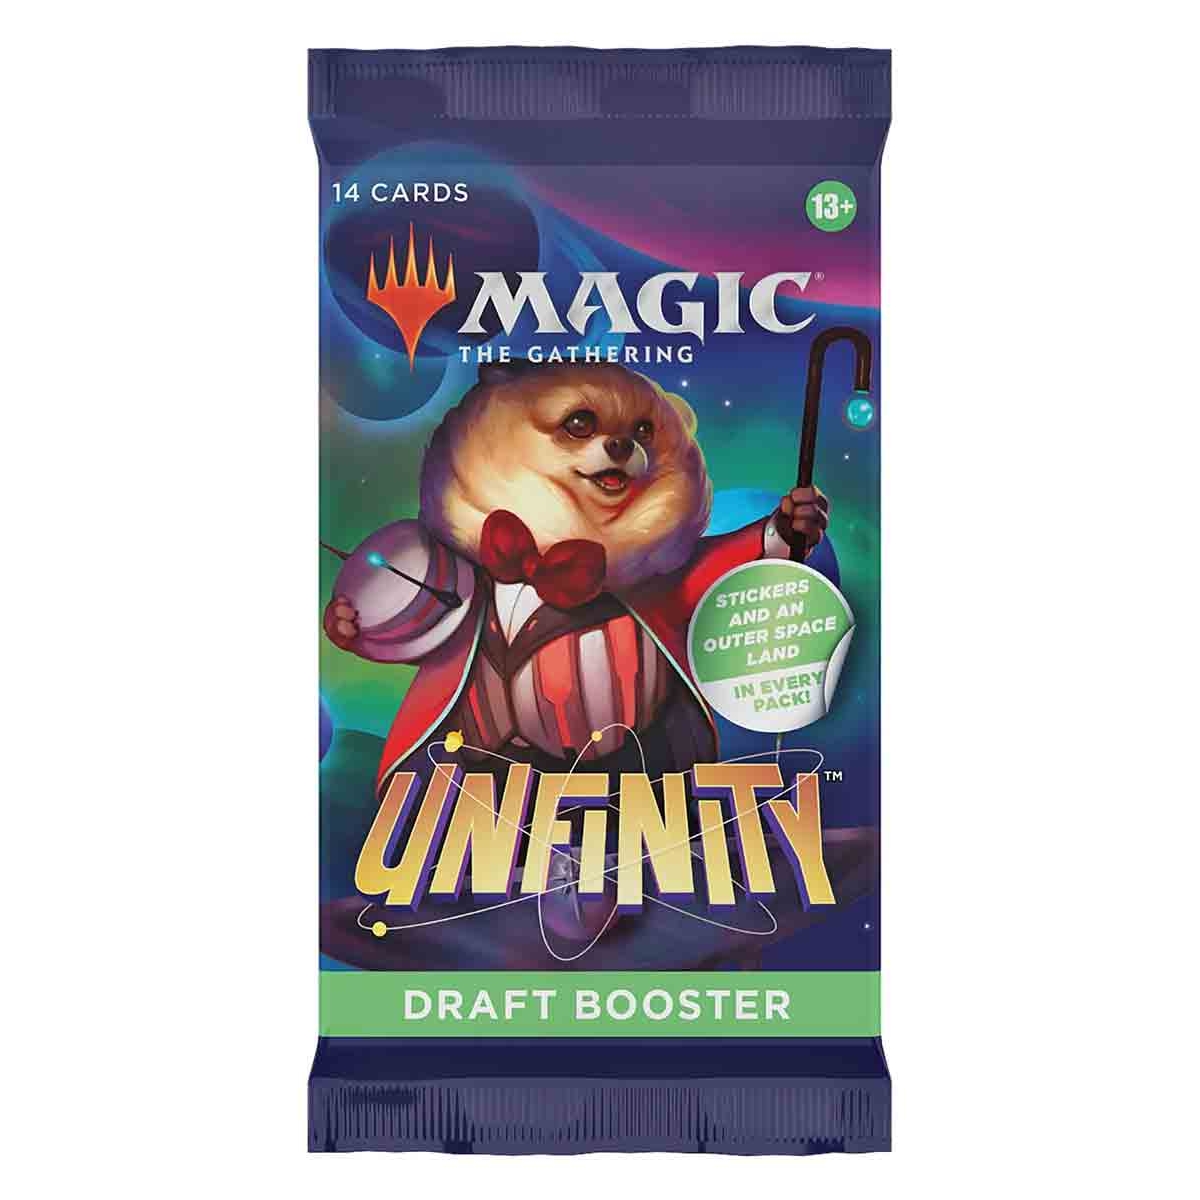 Draft Booster Unfinity...